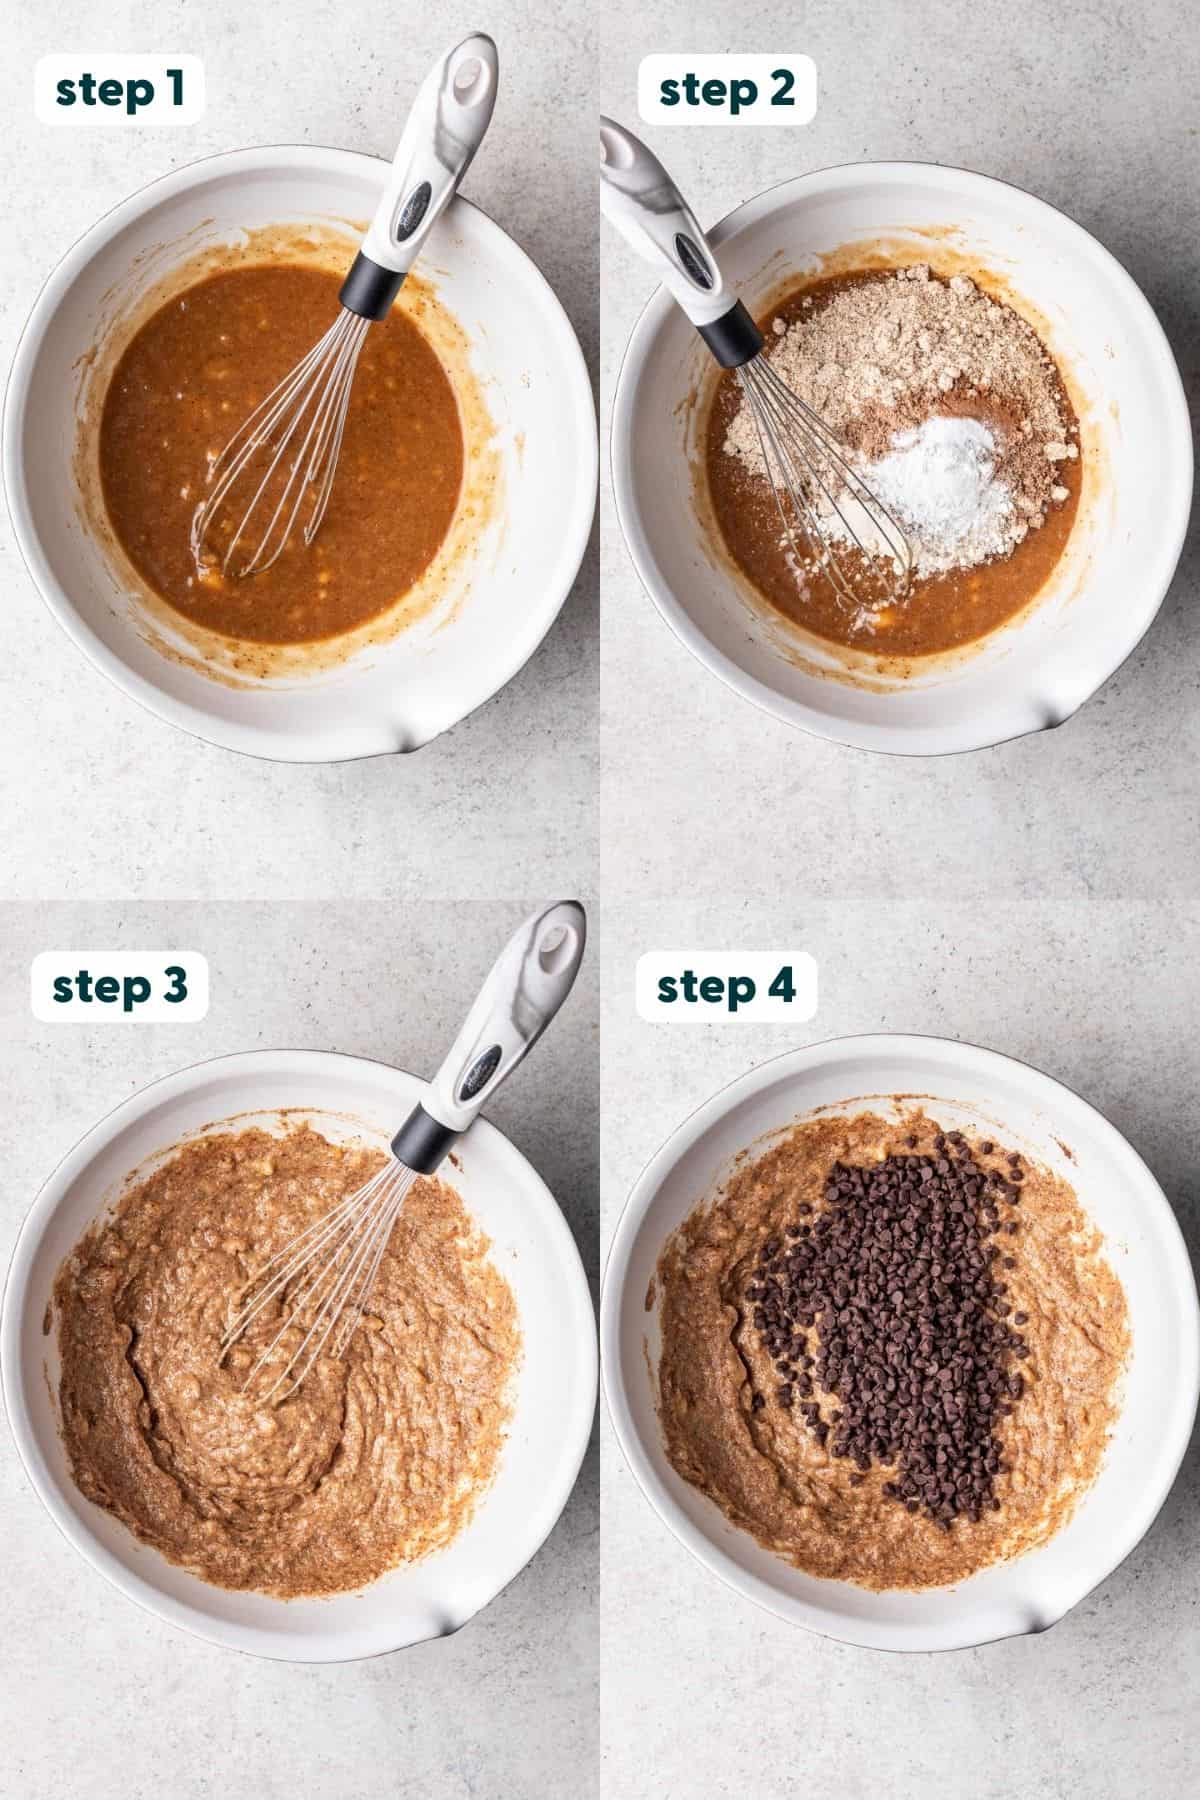 4 photos showing the step by step process of making the muffin batter.